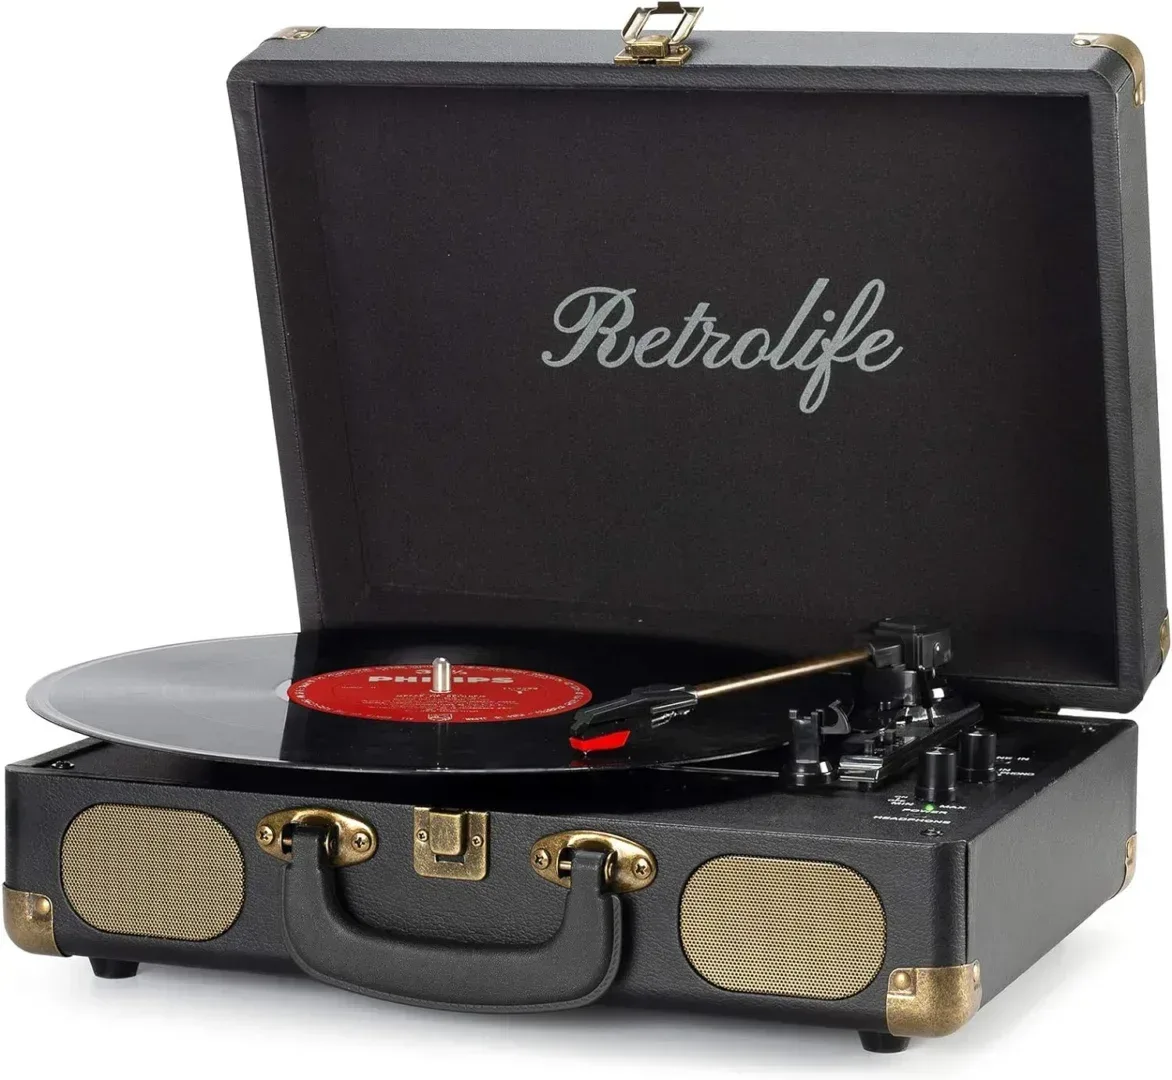 Vinyl Record Player Review